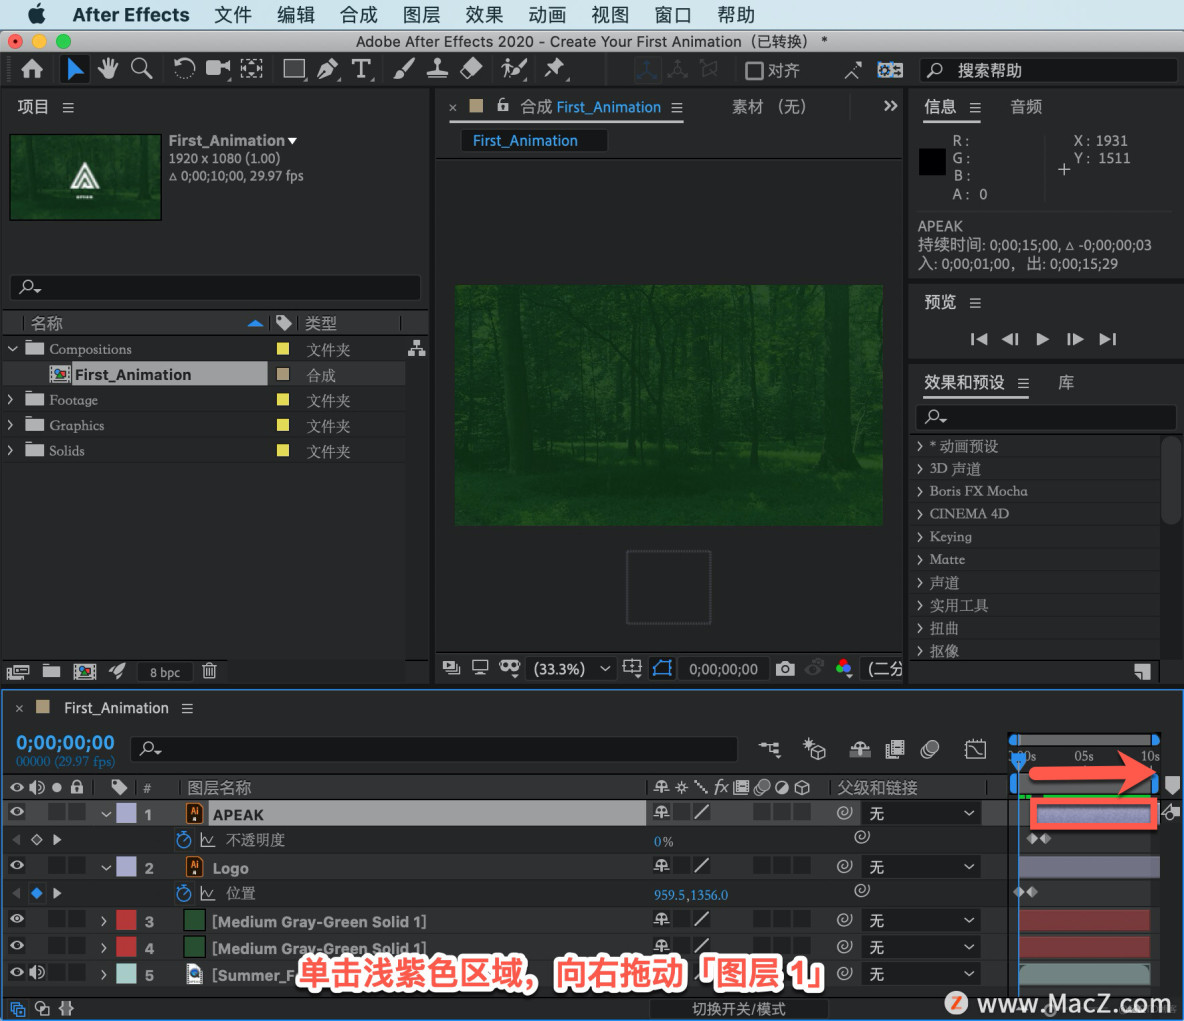 After Effects 教程，如何在 After Effects 中创建动画？_After Effects_08